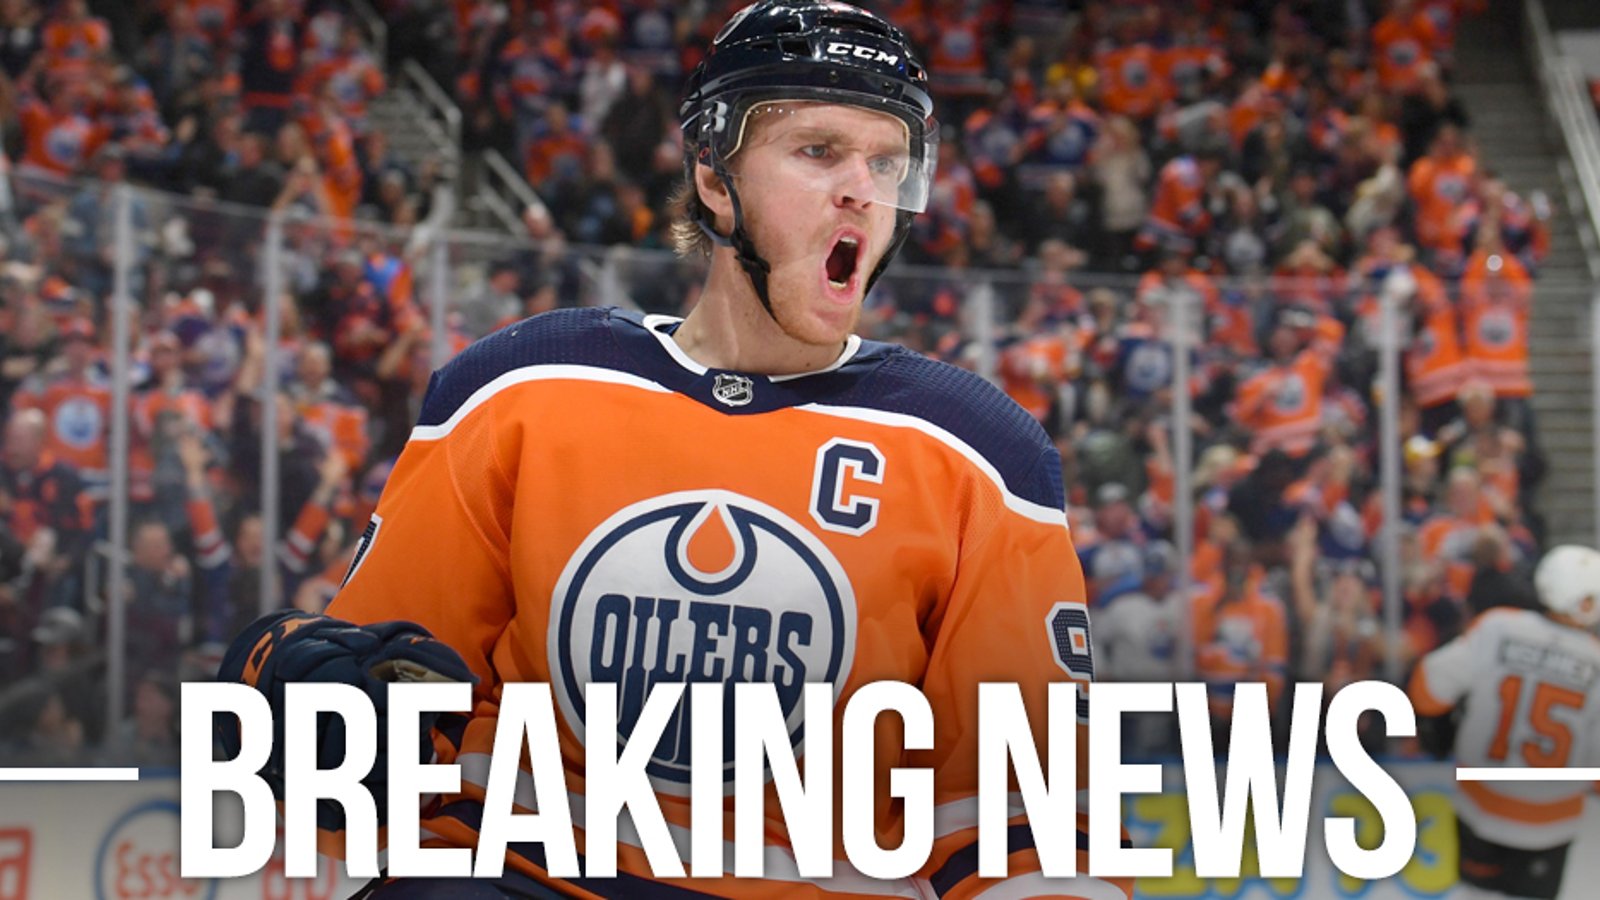 Connor McDavid has tested positive for COVID-19